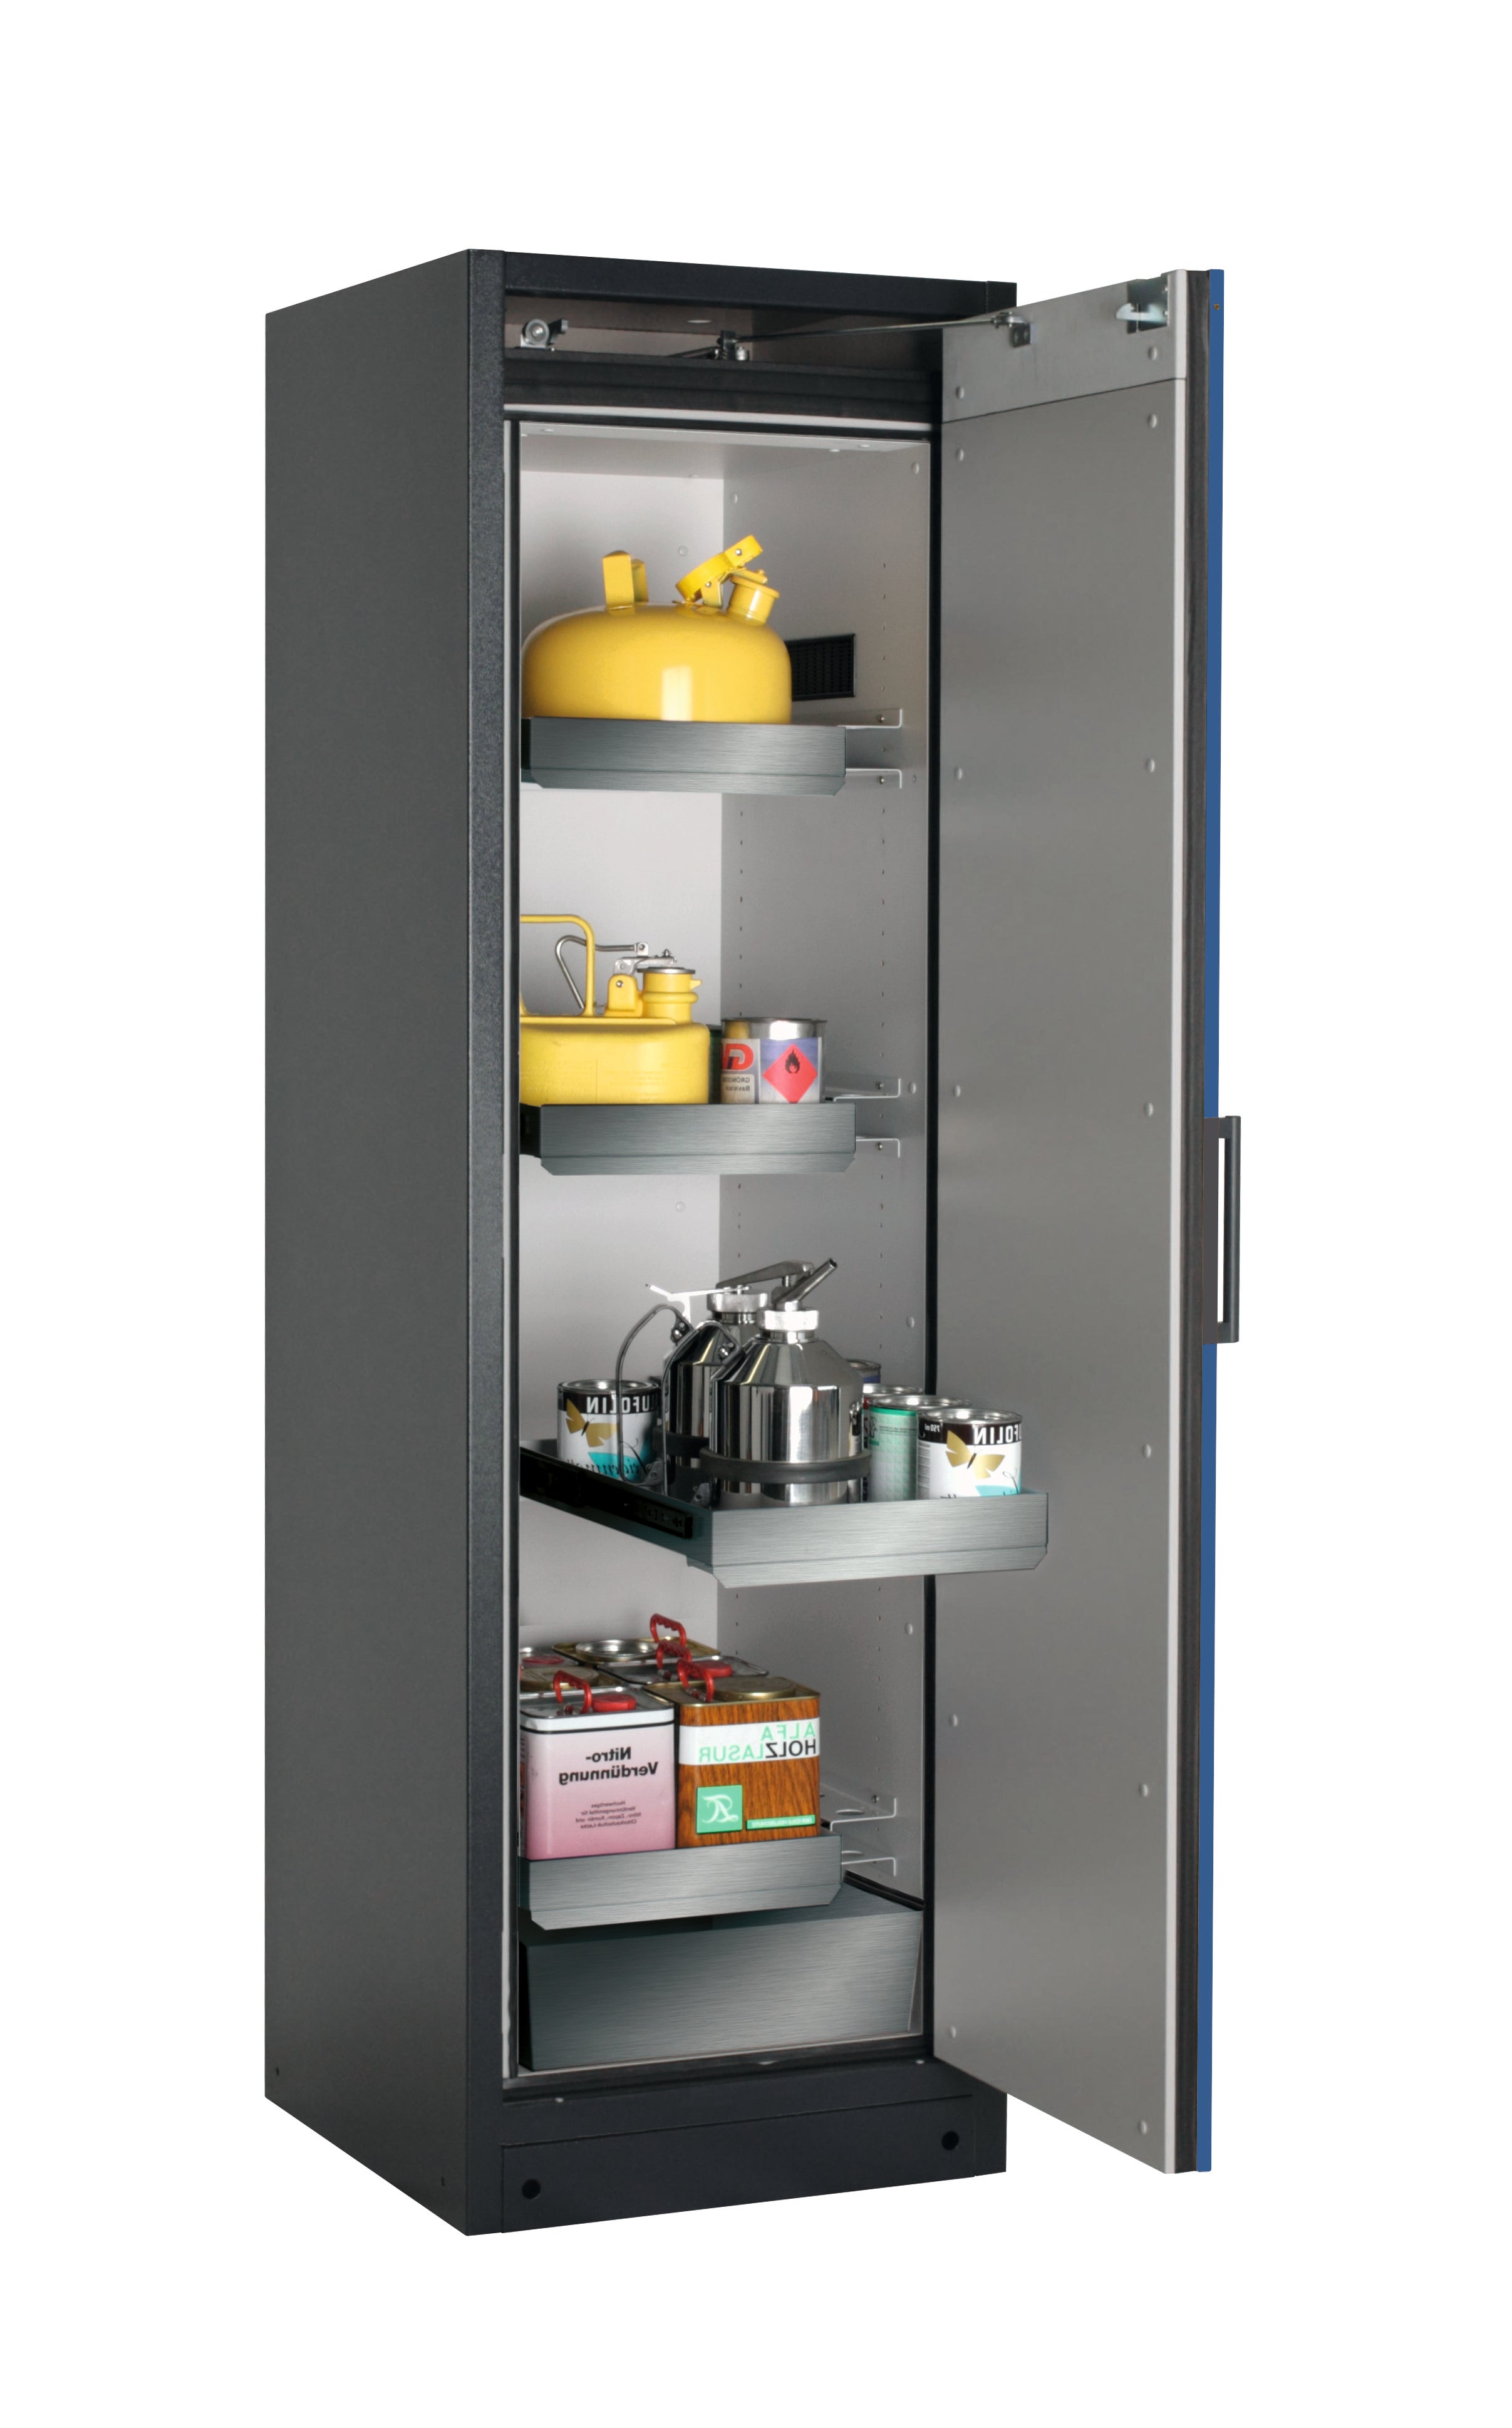 Type 90 safety storage cabinet Q-PEGASUS-90 model Q90.195.060.WDACR in gentian blue RAL 5010 with 3x drawer (standard) (stainless steel 1.4301),